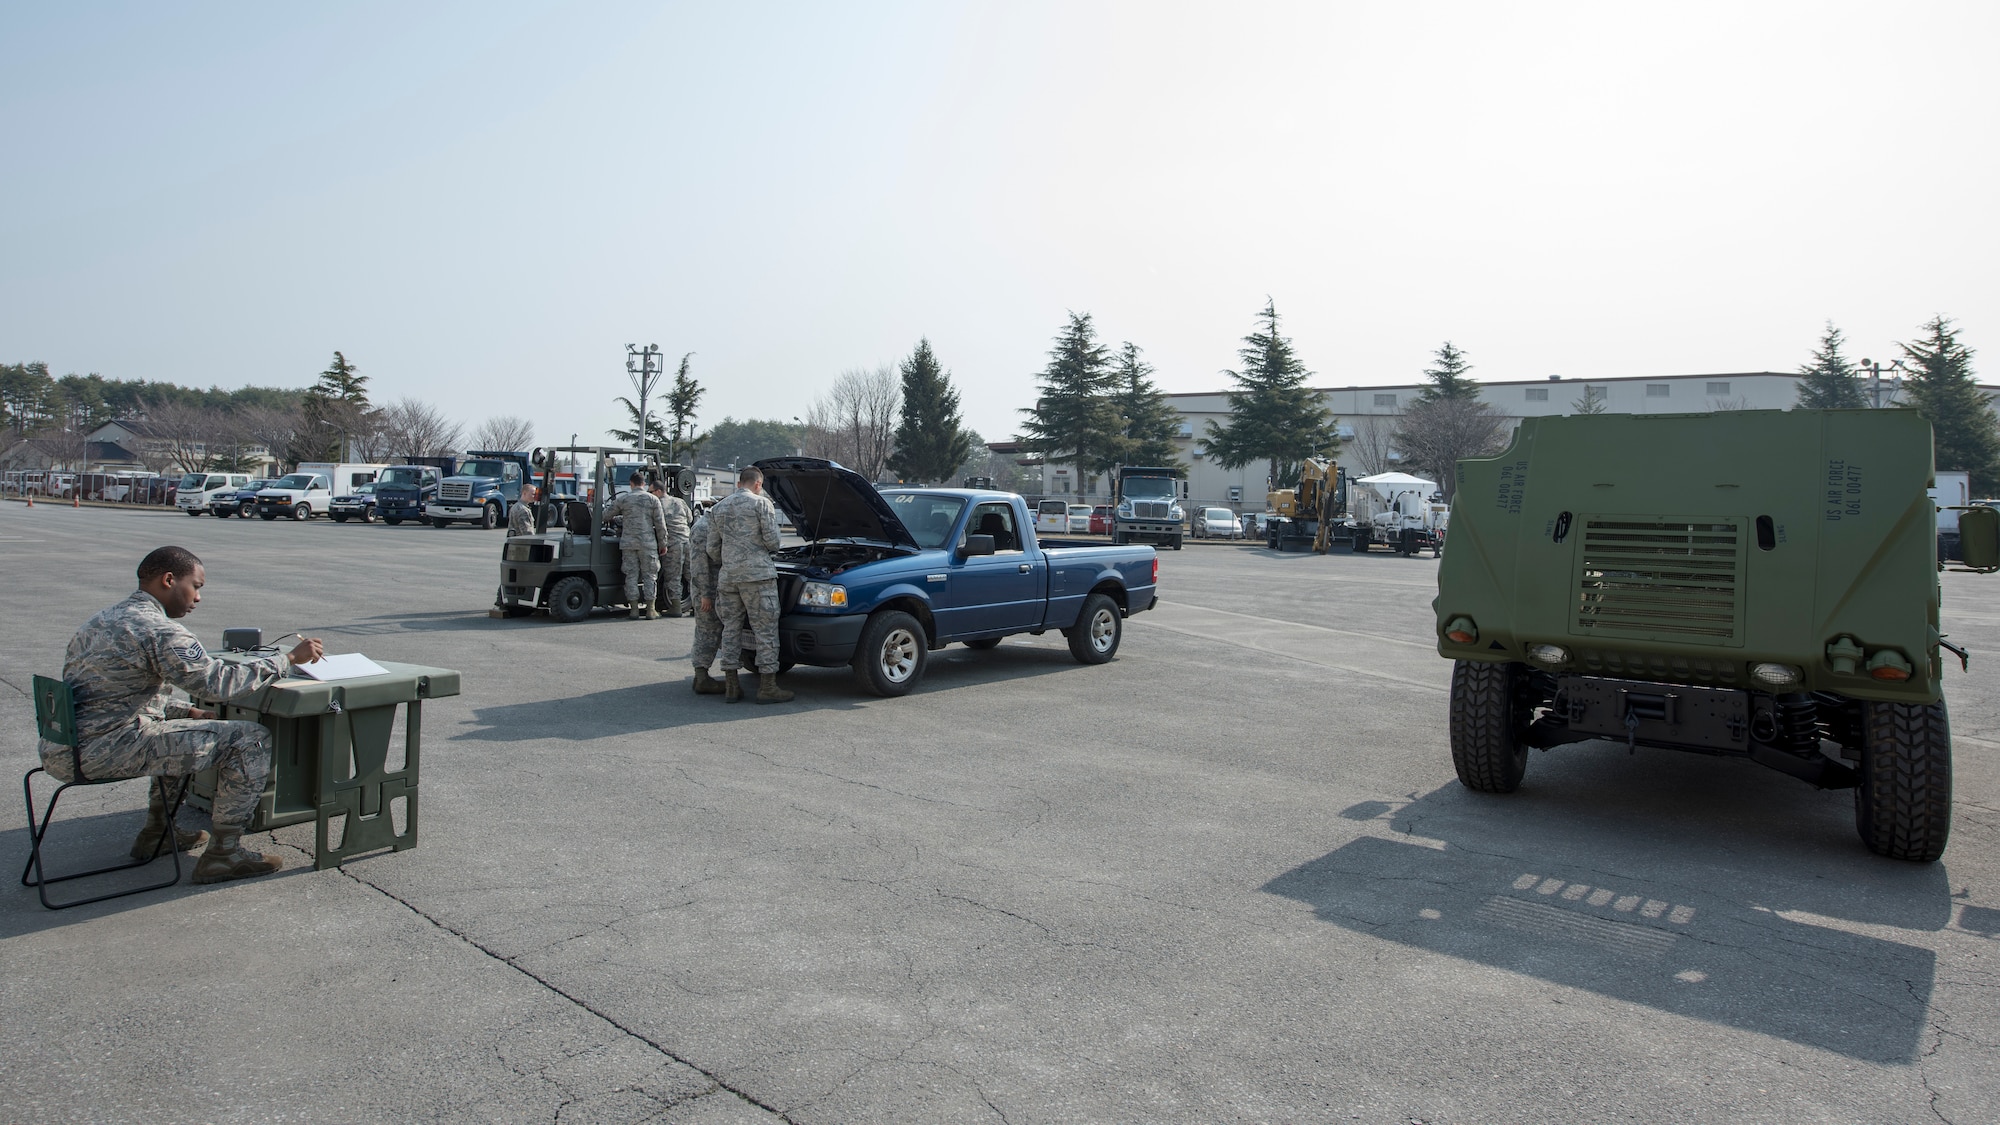 Airmen with the 35th Logistic Readiness Squadron work on inoperable vehicles during the first LRS Agile Combat Employment exercise at Misawa Air Base, Japan, March 20, 2019. The primary objective of the exercise was to fix a small pickup truck and a standard fork lift with an array of mechanical issues while having a limited number of tools to work with, similar to the work environment 35th LRS Airmen would face in a real-world evacuation or expeditionary setting (U.S. Air Force photo by Airman 1st Class Collette Brooks)